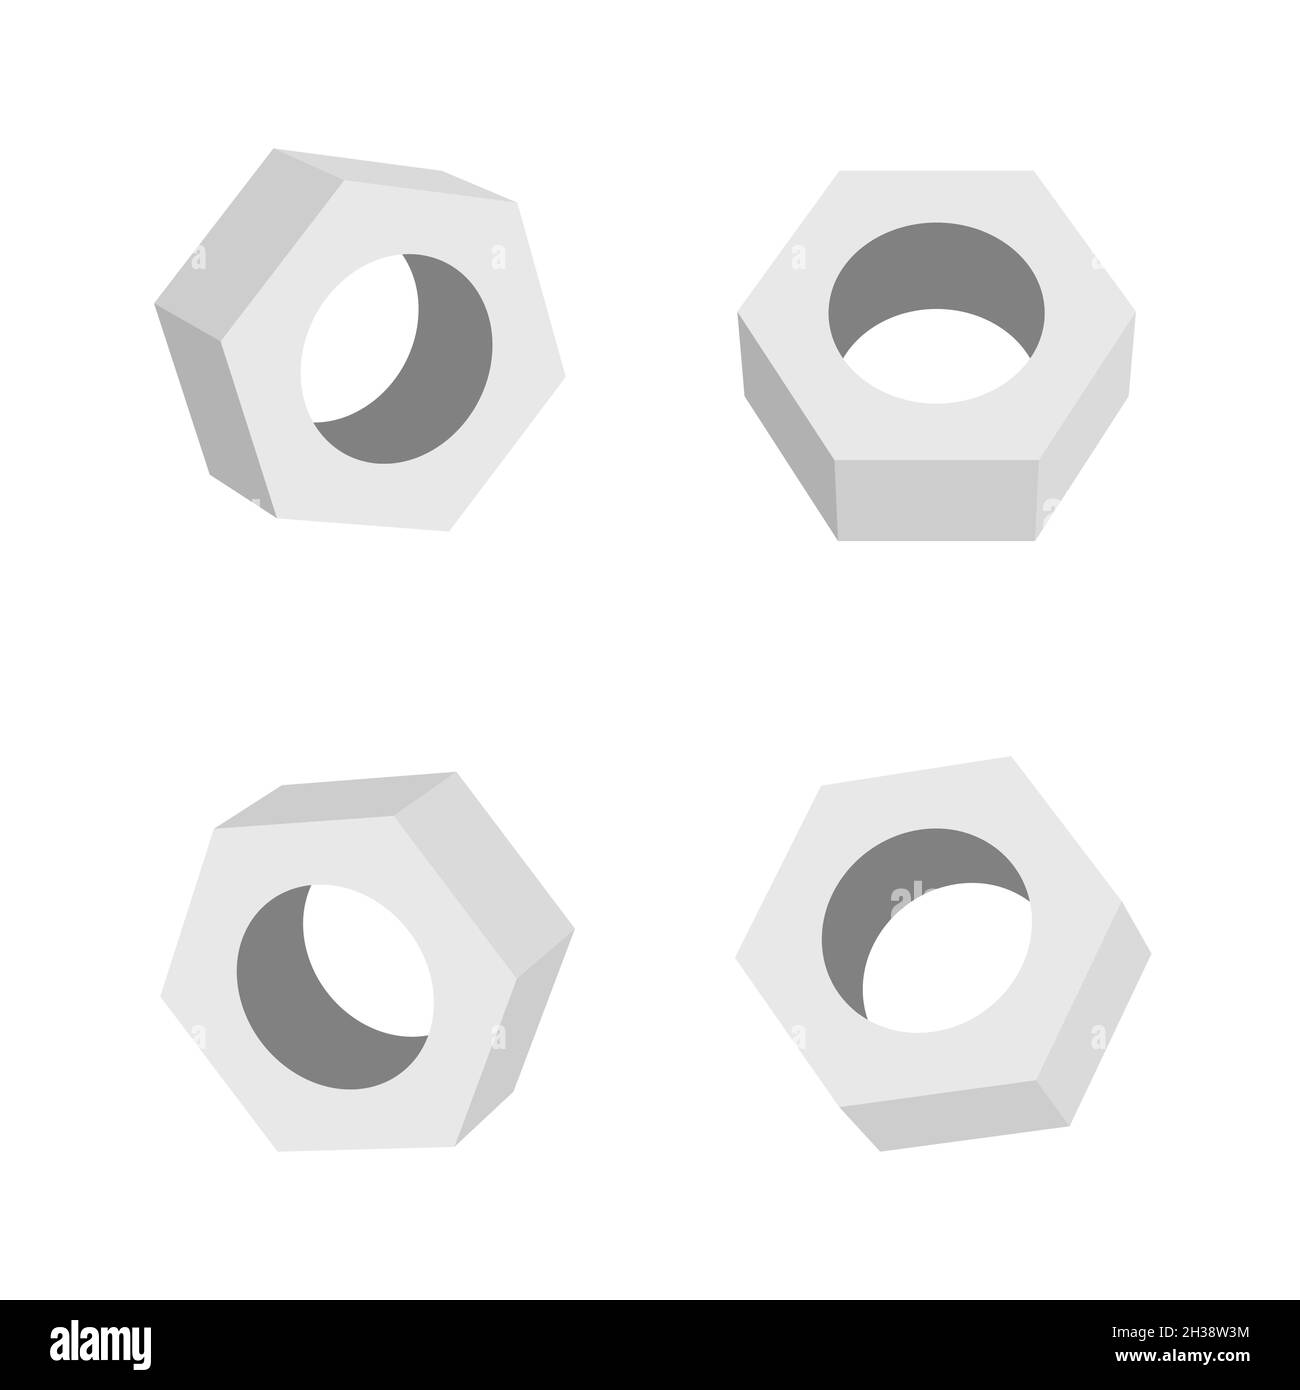 40,960 Metal Washers Images, Stock Photos, 3D objects, & Vectors